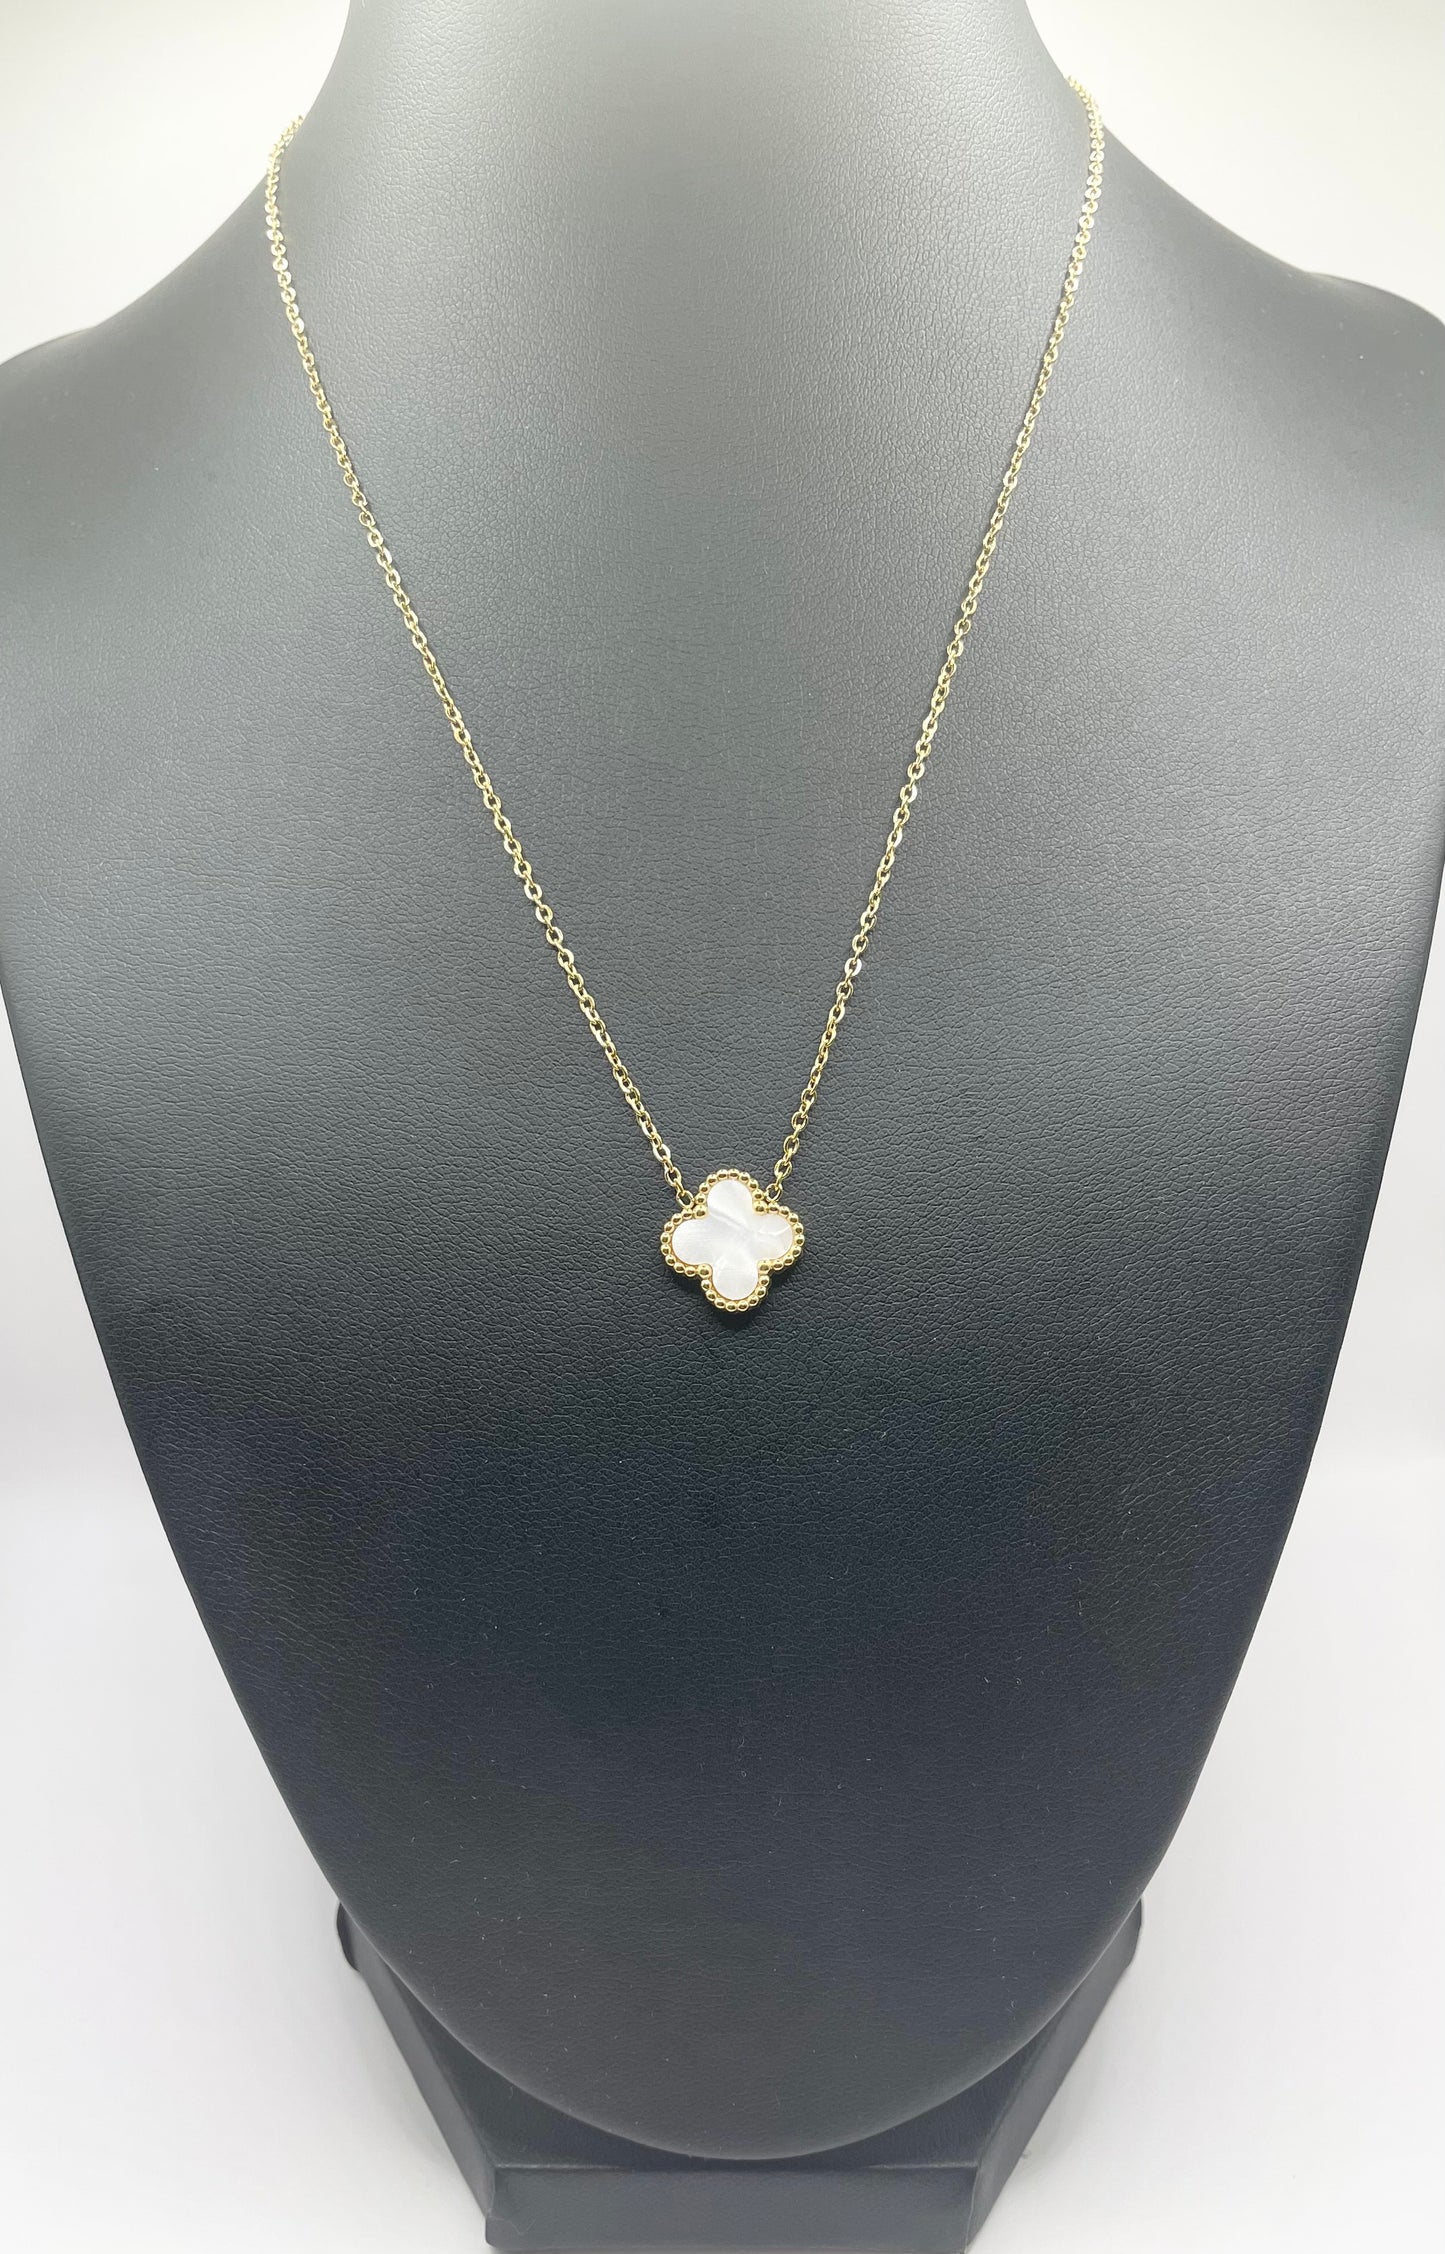 Colored Clover Necklace 18k Gold Plated